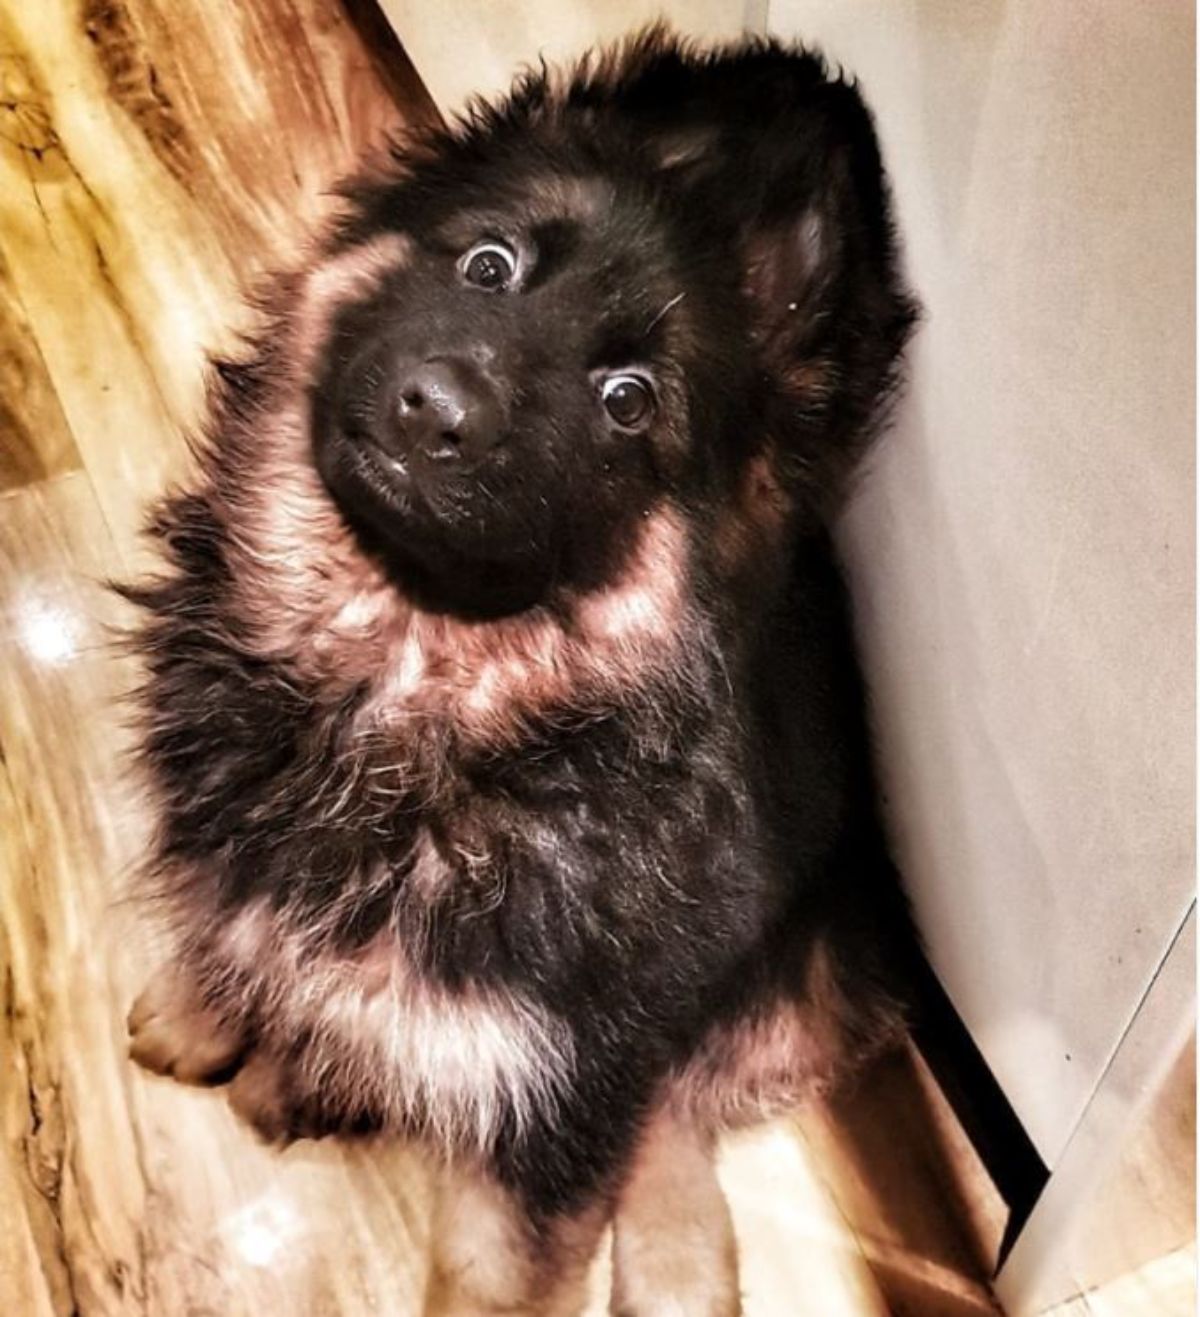 German Shepherd puppy sitting on the floor with its big scared eyes